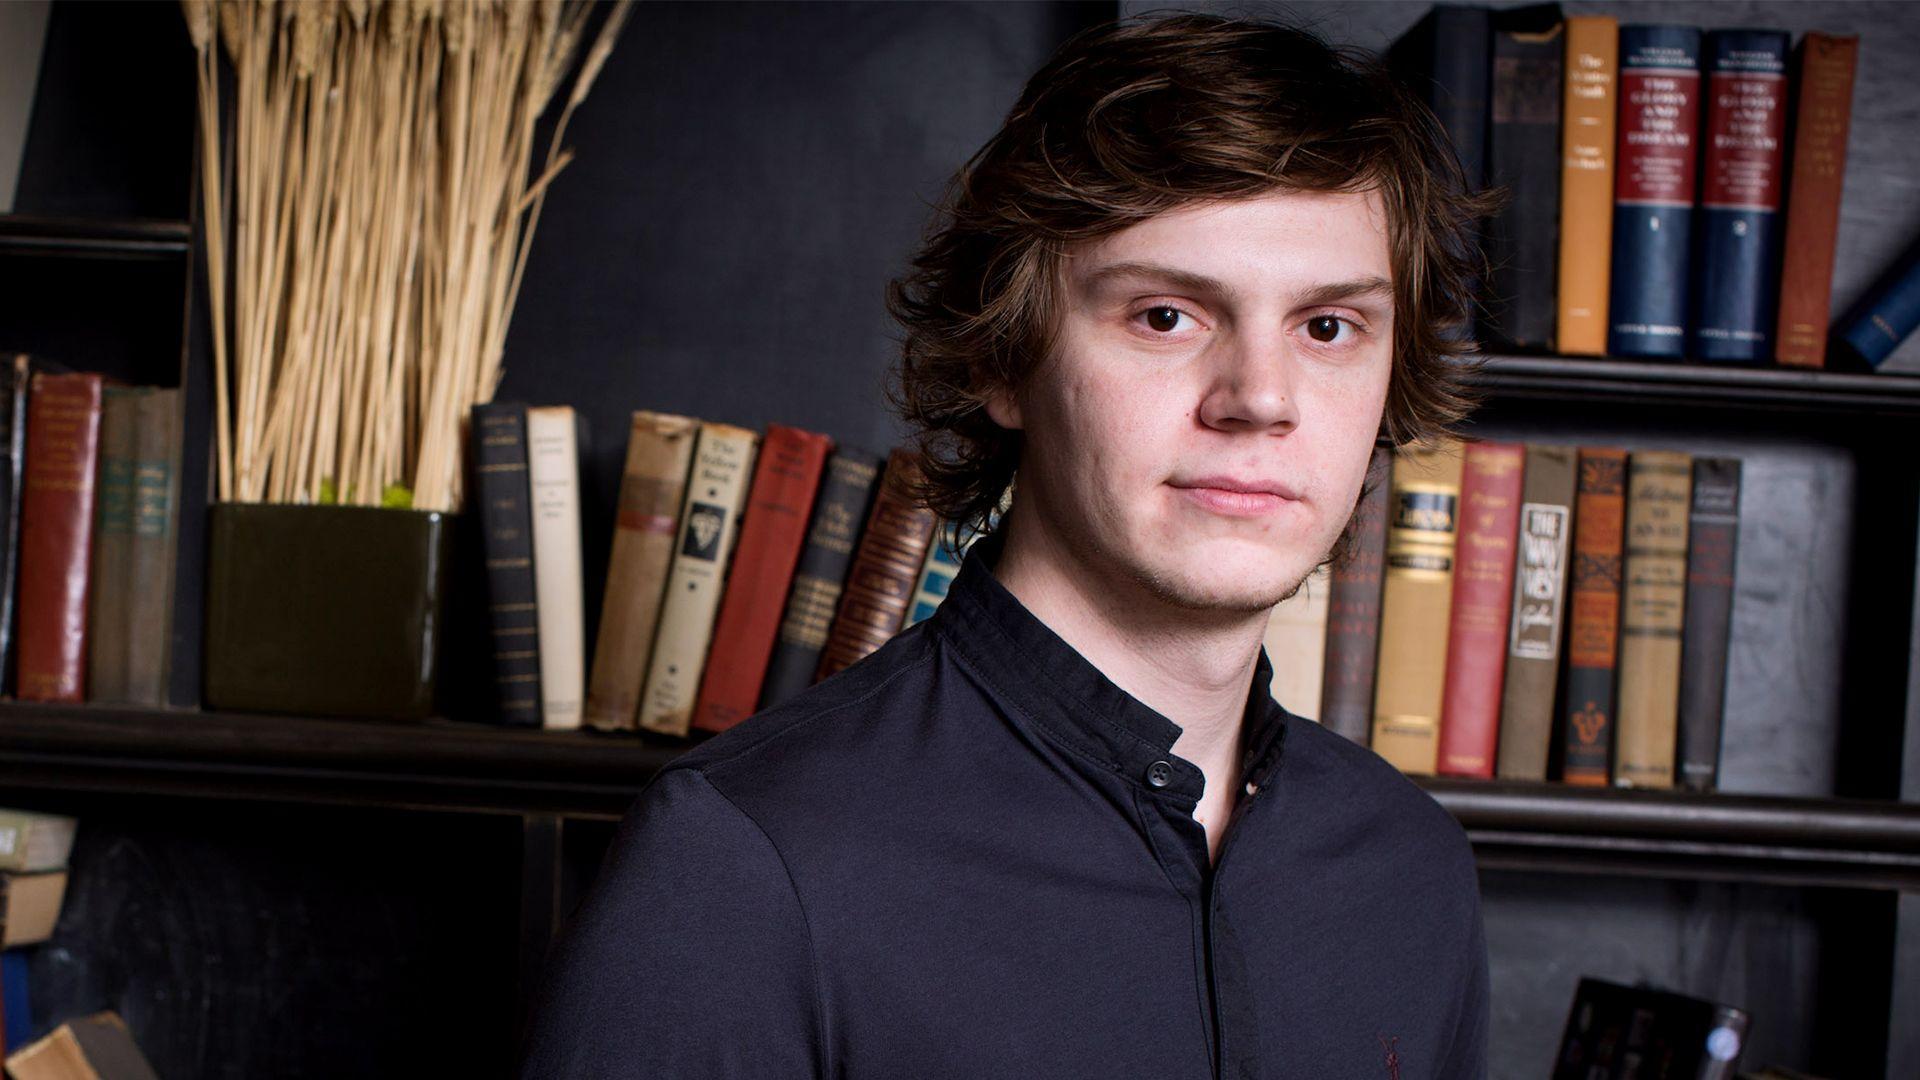 Evan Peters Wallpaper High Resolution and Quality Download